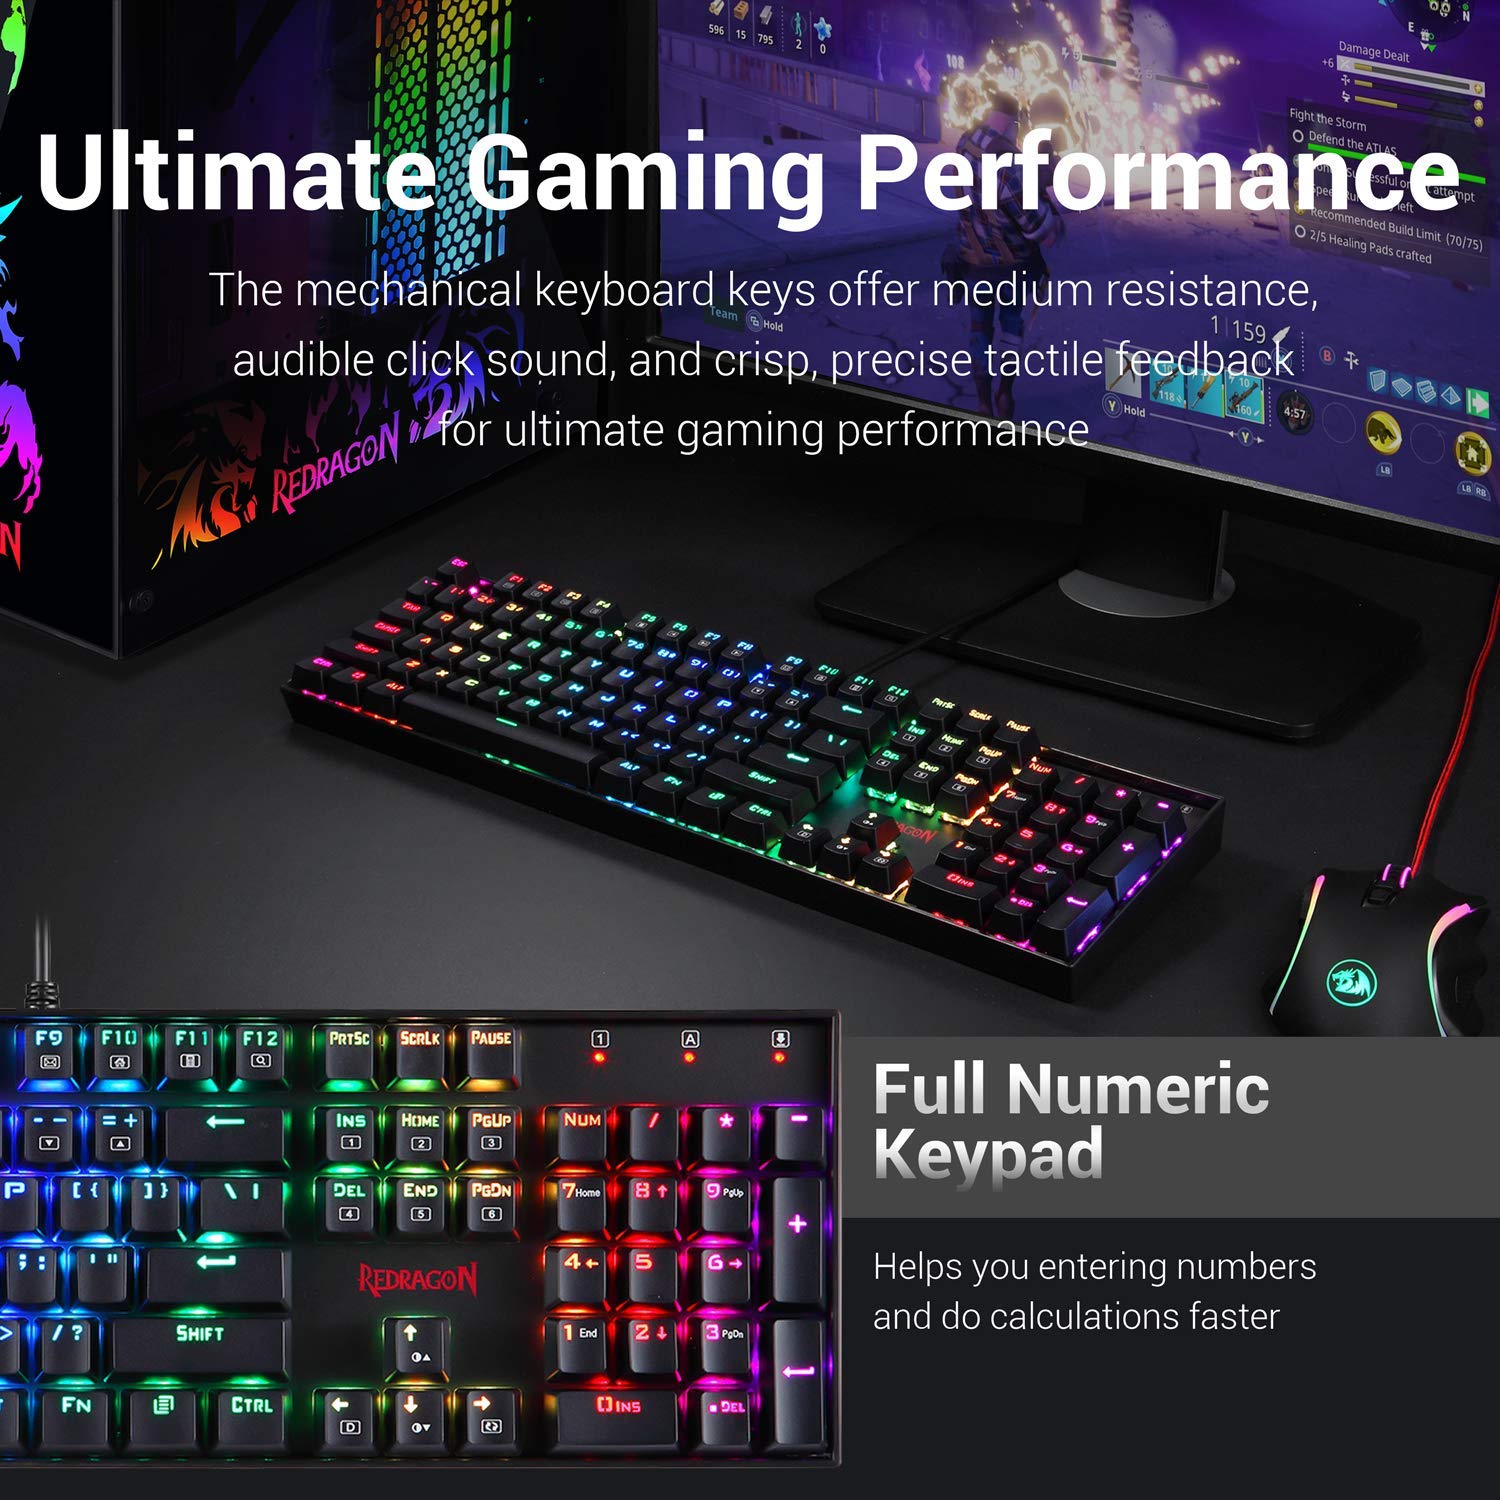 Redragon K551-RGB-BA Mechanical Gaming Keyboard and Mouse Combo Wired RGB LED Backlit 104 Key Keyboard & 7200 DPI Mouse for Windows PC Gamers (104 Key Keyboard Mouse Set)